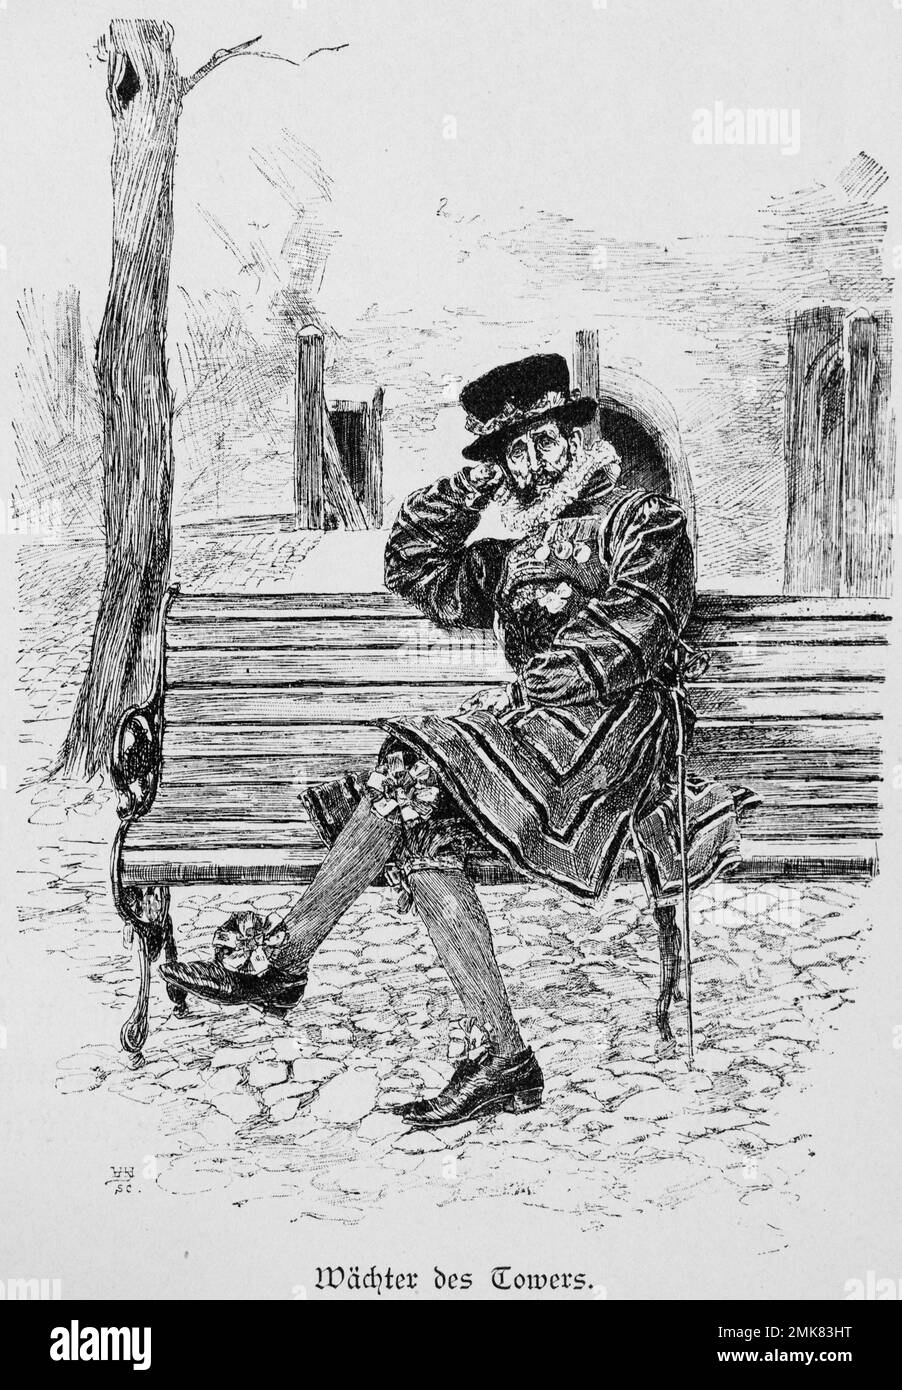 Sitting Beefeater, Guardian of the Tower, Royal Palace, London, historical illustration, wood engraving, 19th century Stock Photo